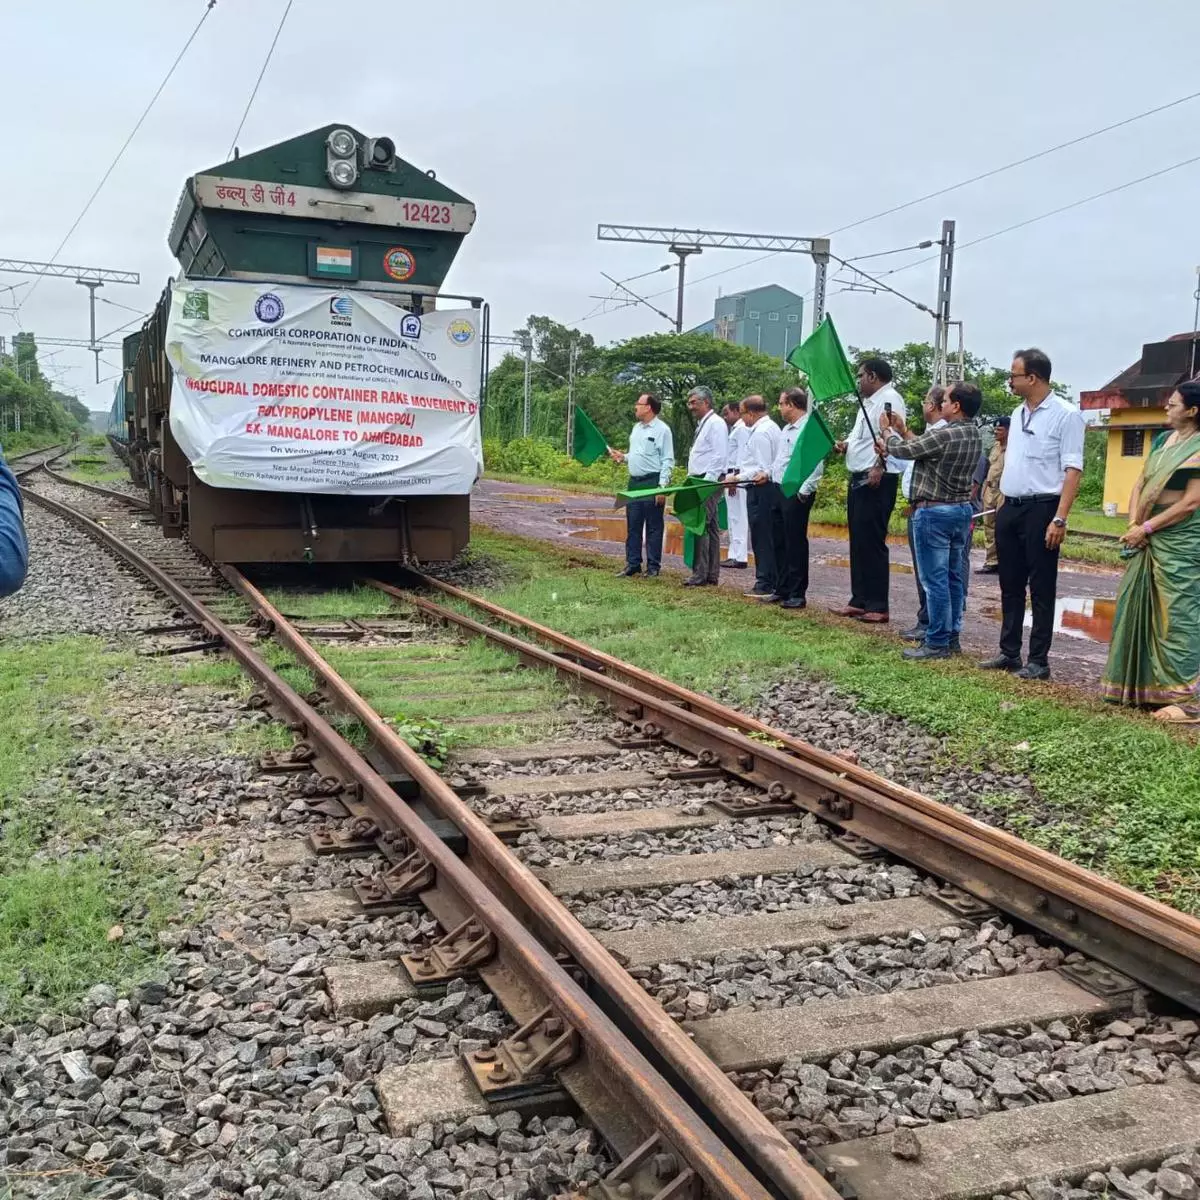 Officials of MRPL, Container Corporation of India Ltd, Southern Railway, and Konkan Railway flagging off polypropylene consignment from Mangaluru.